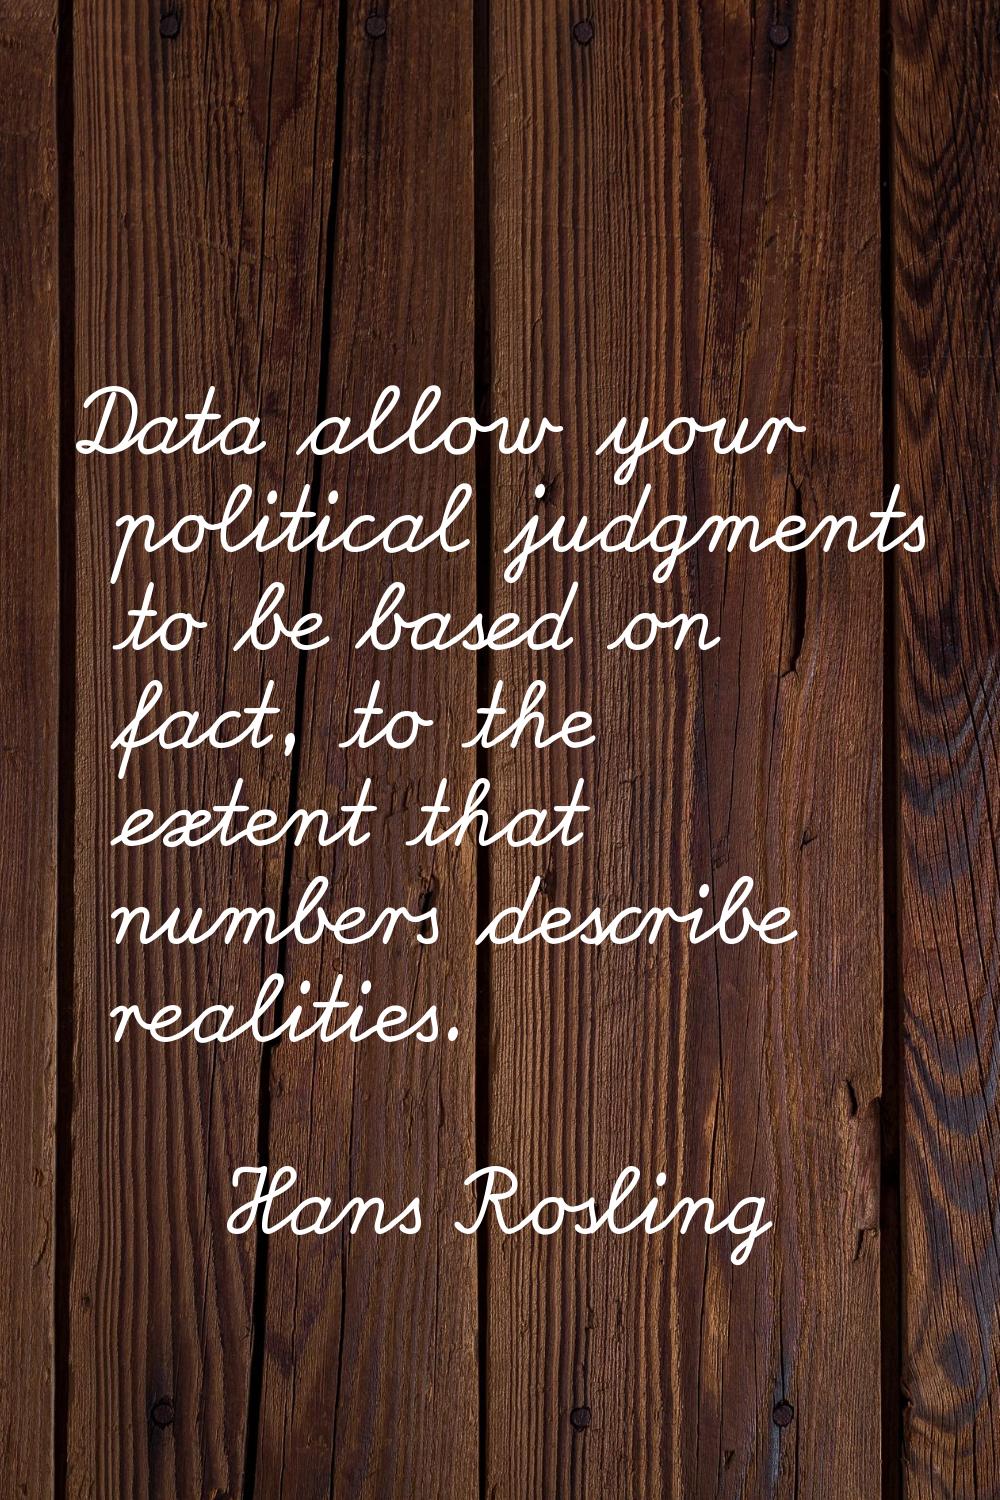 Data allow your political judgments to be based on fact, to the extent that numbers describe realit